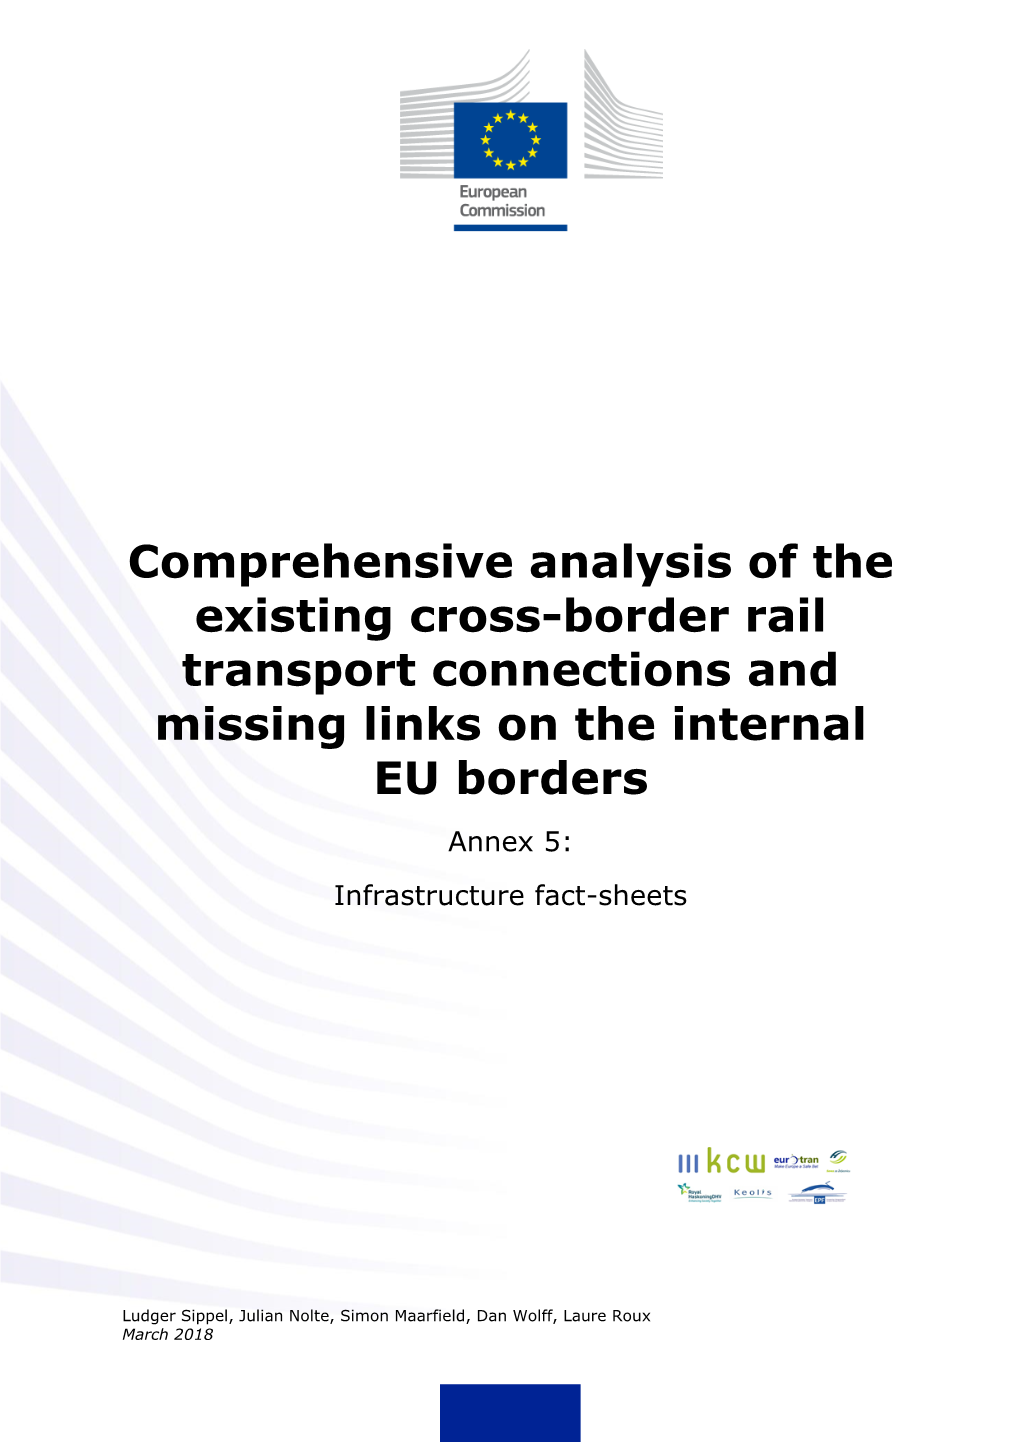 Comprehensive Analysis of the Existing Cross-Border Rail Transport Connections and Missing Links on the Internal EU Borders Annex 5: Infrastructure Fact-Sheets